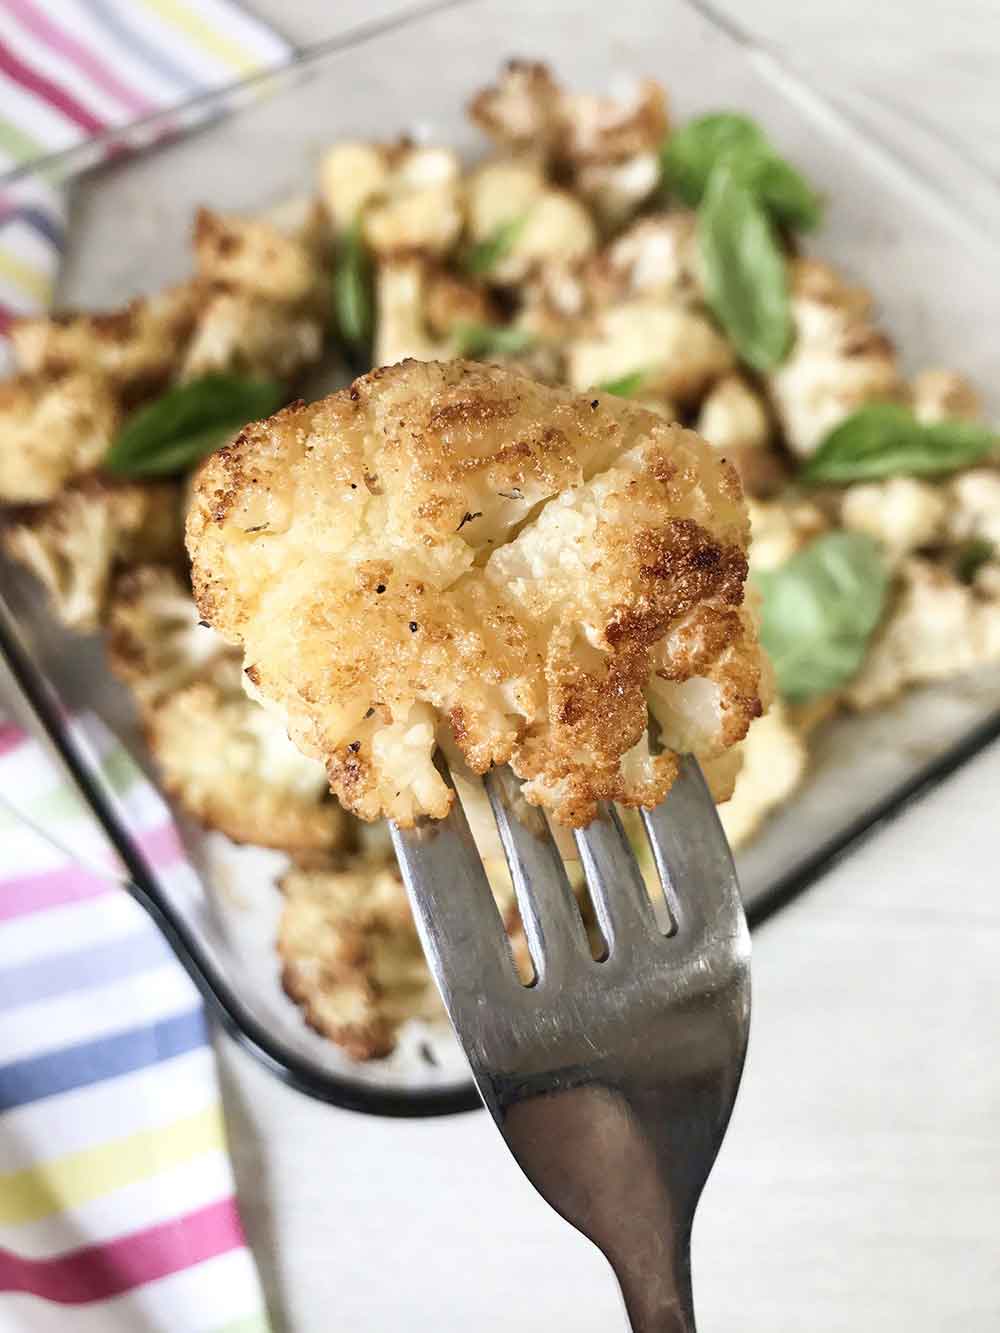 Forest of the Vegan roasted cauliflower with garlic in a fork.